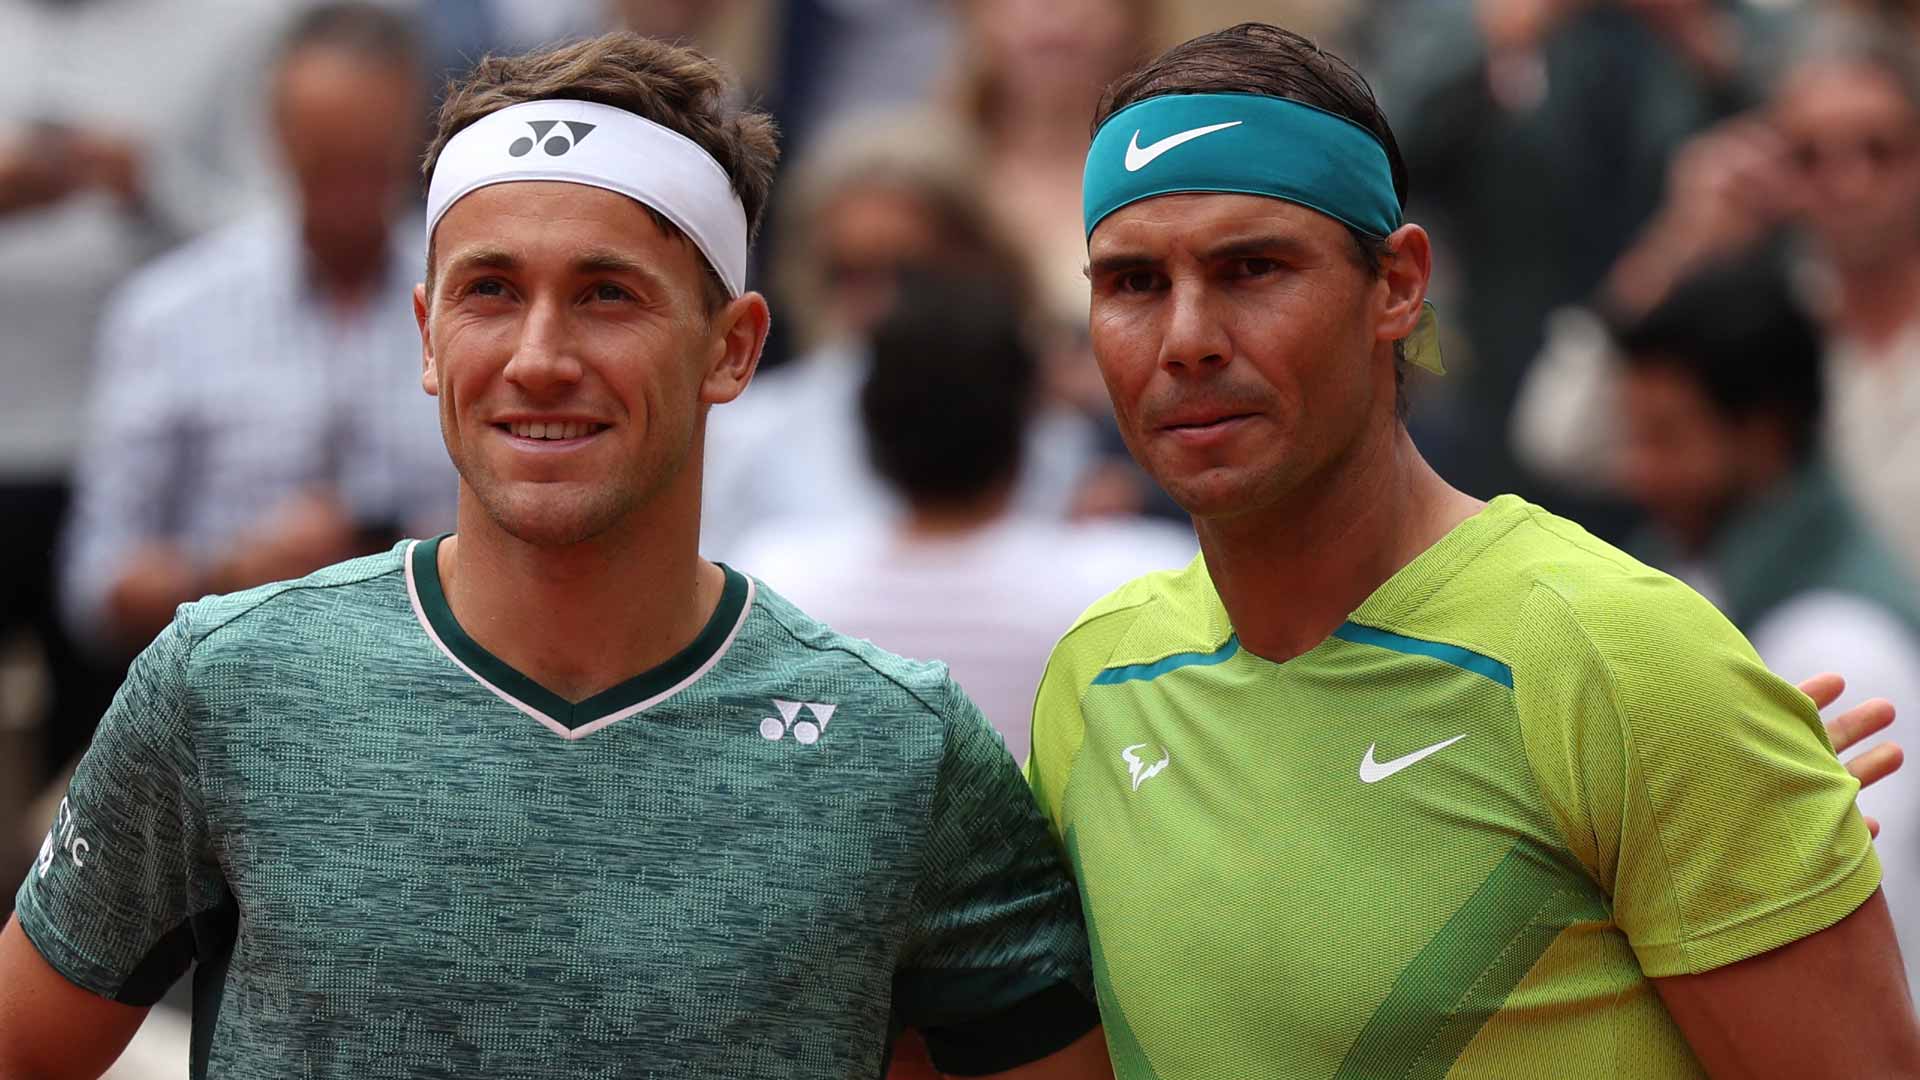 Casper Ruud and Rafael Nadal have played twice, with the Spaniard winning both meetings.